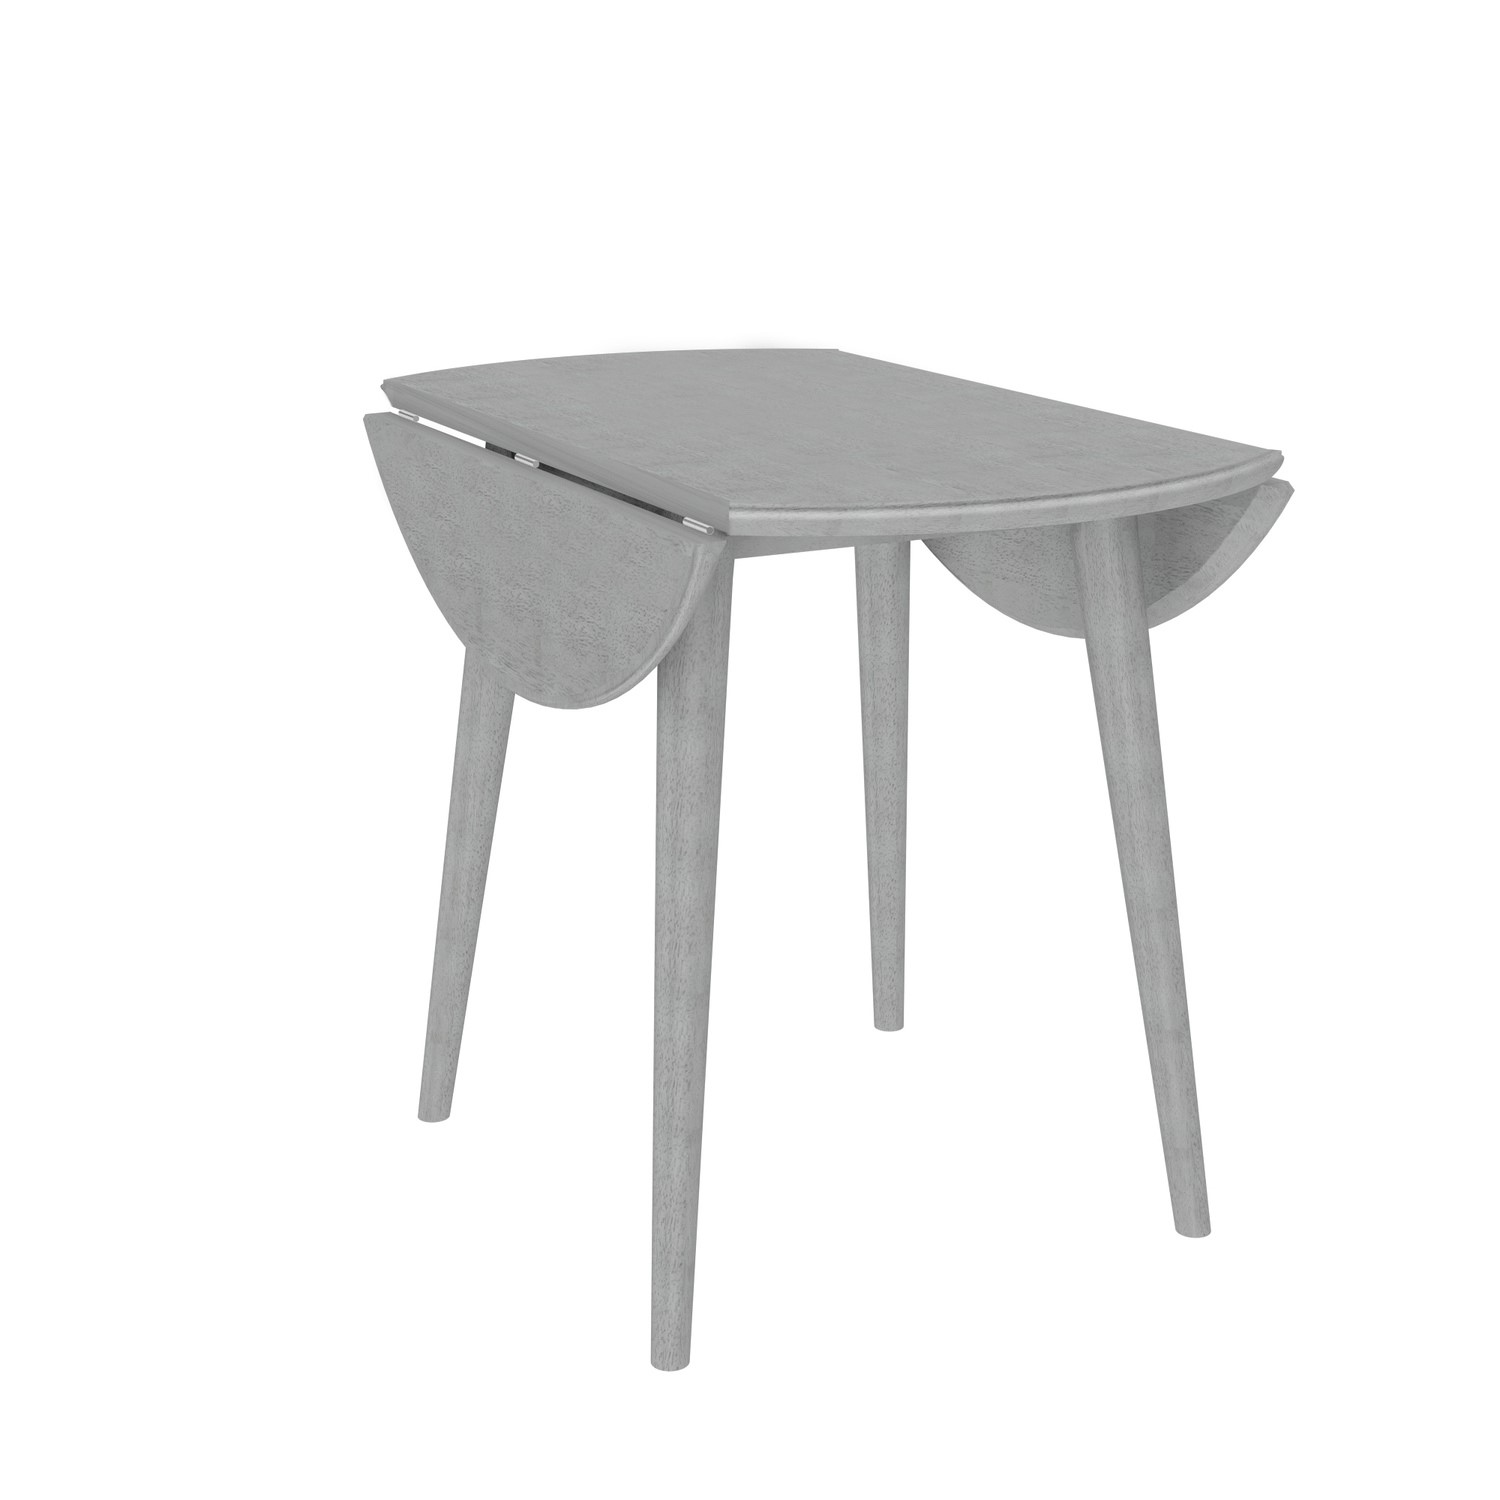 Seats 4 Cami Round Drop Leaf Dining Table in Grey